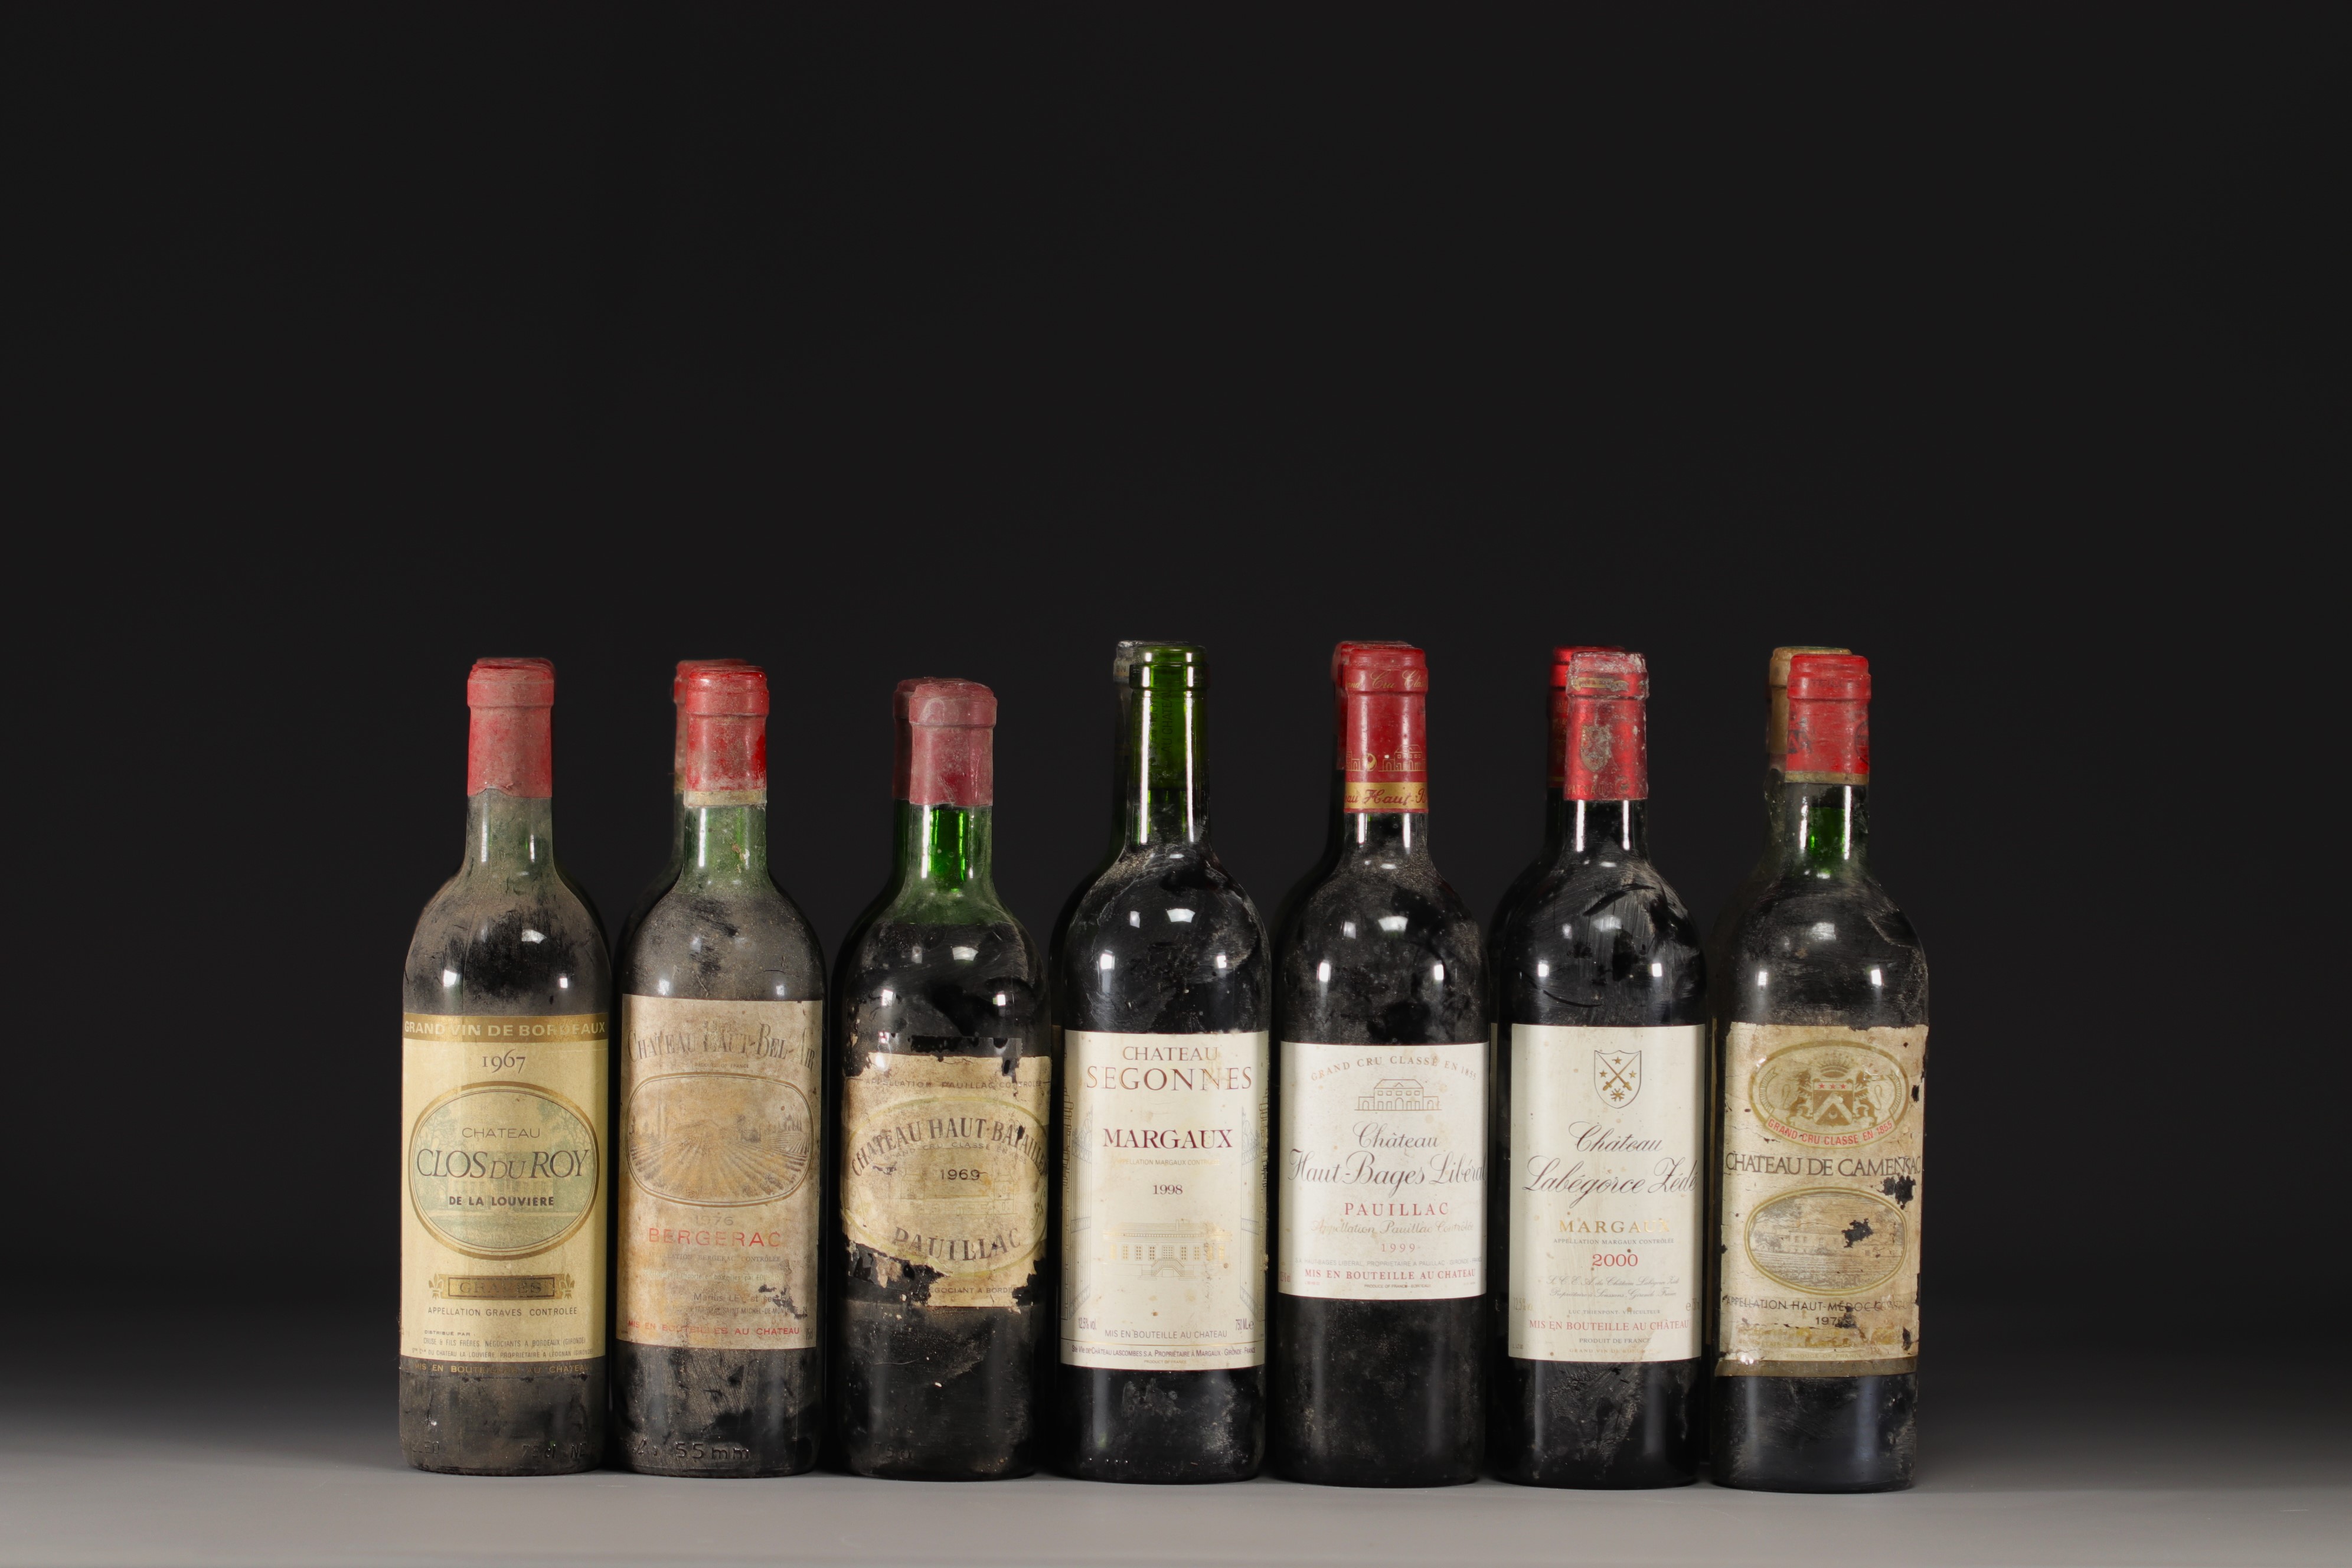 Lot of 21 bottles of various Bordeaux wines.